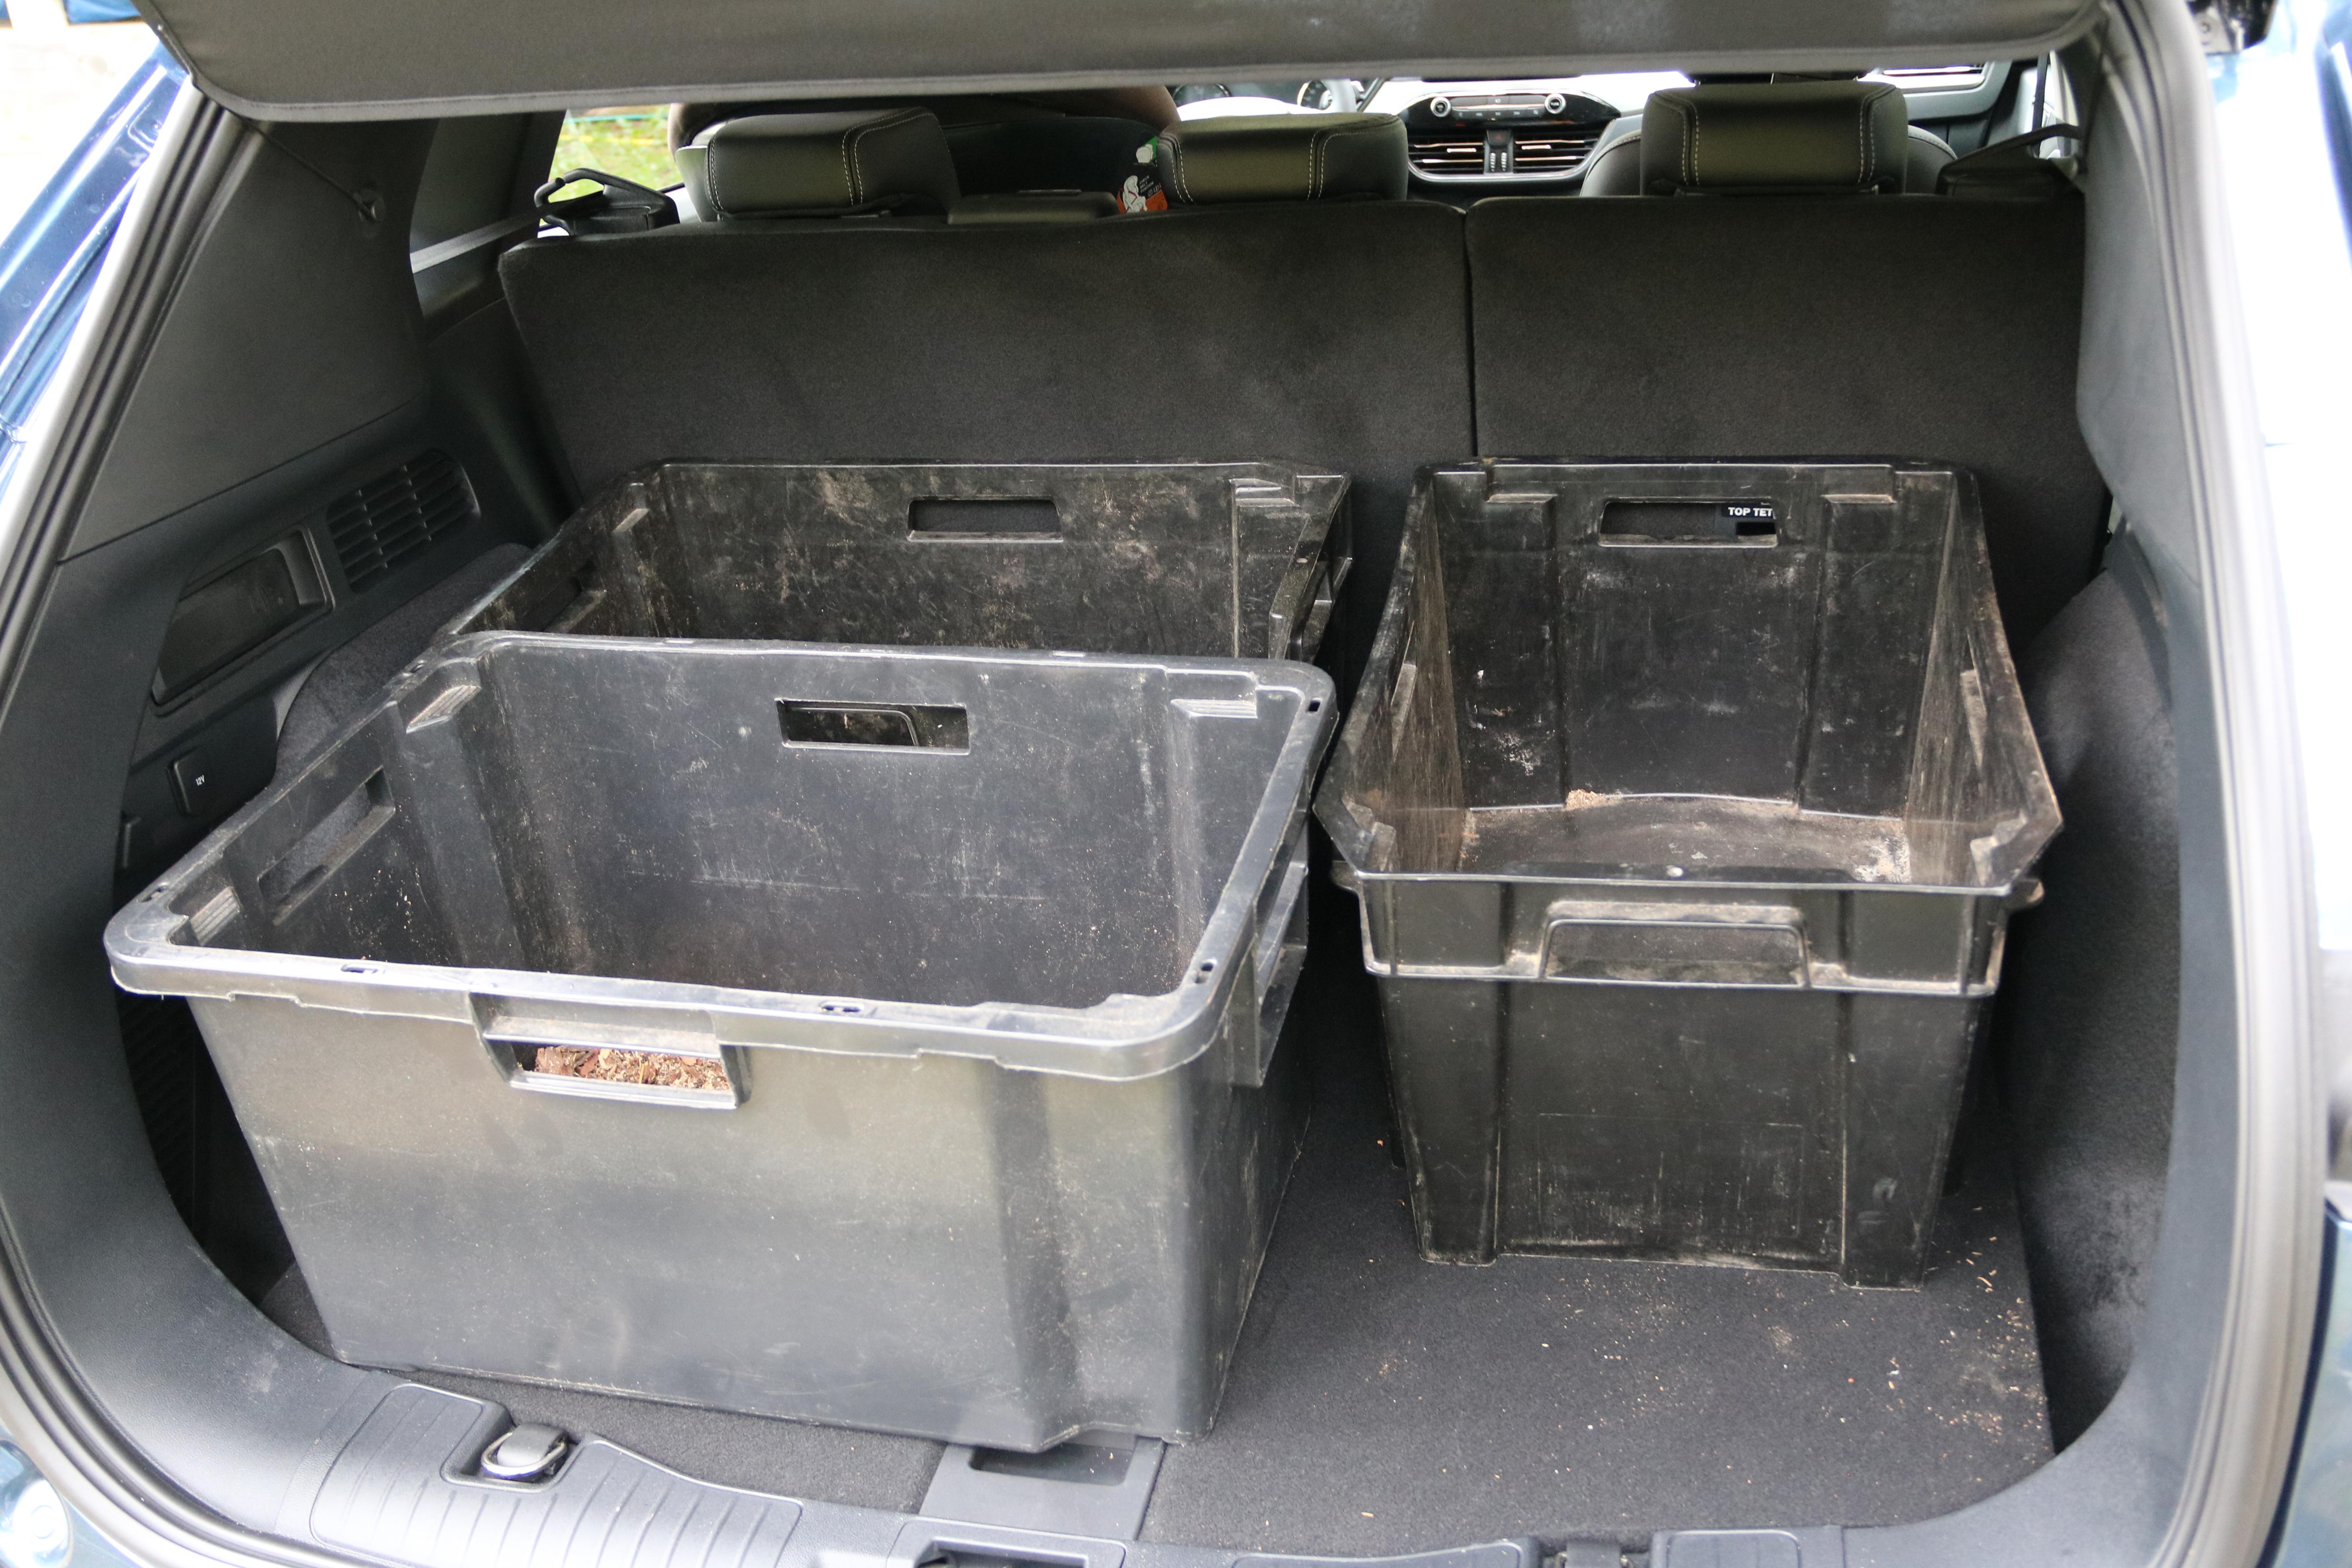 Ford Kuga PHEV trunk filled with three plastic bins